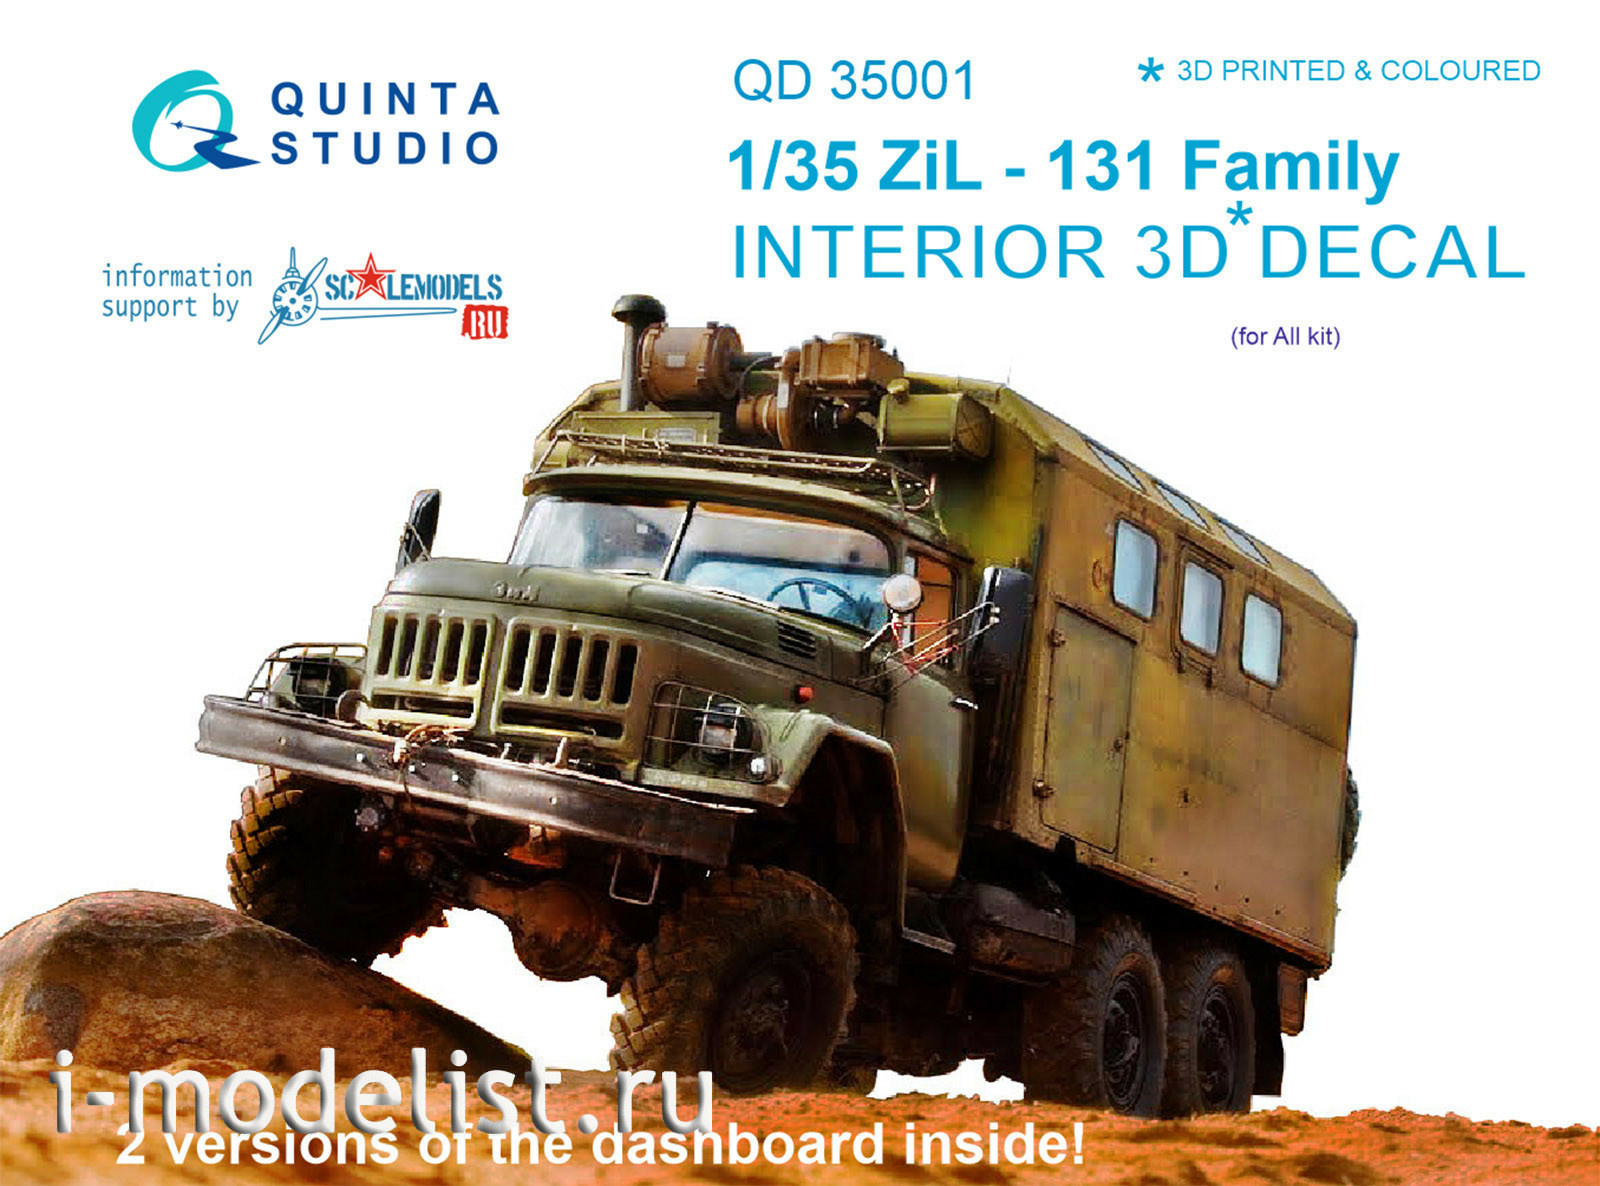 QD35001 Quinta Studio 1/35 3D cabin interior Decal for the Zill-131 family (for all models)